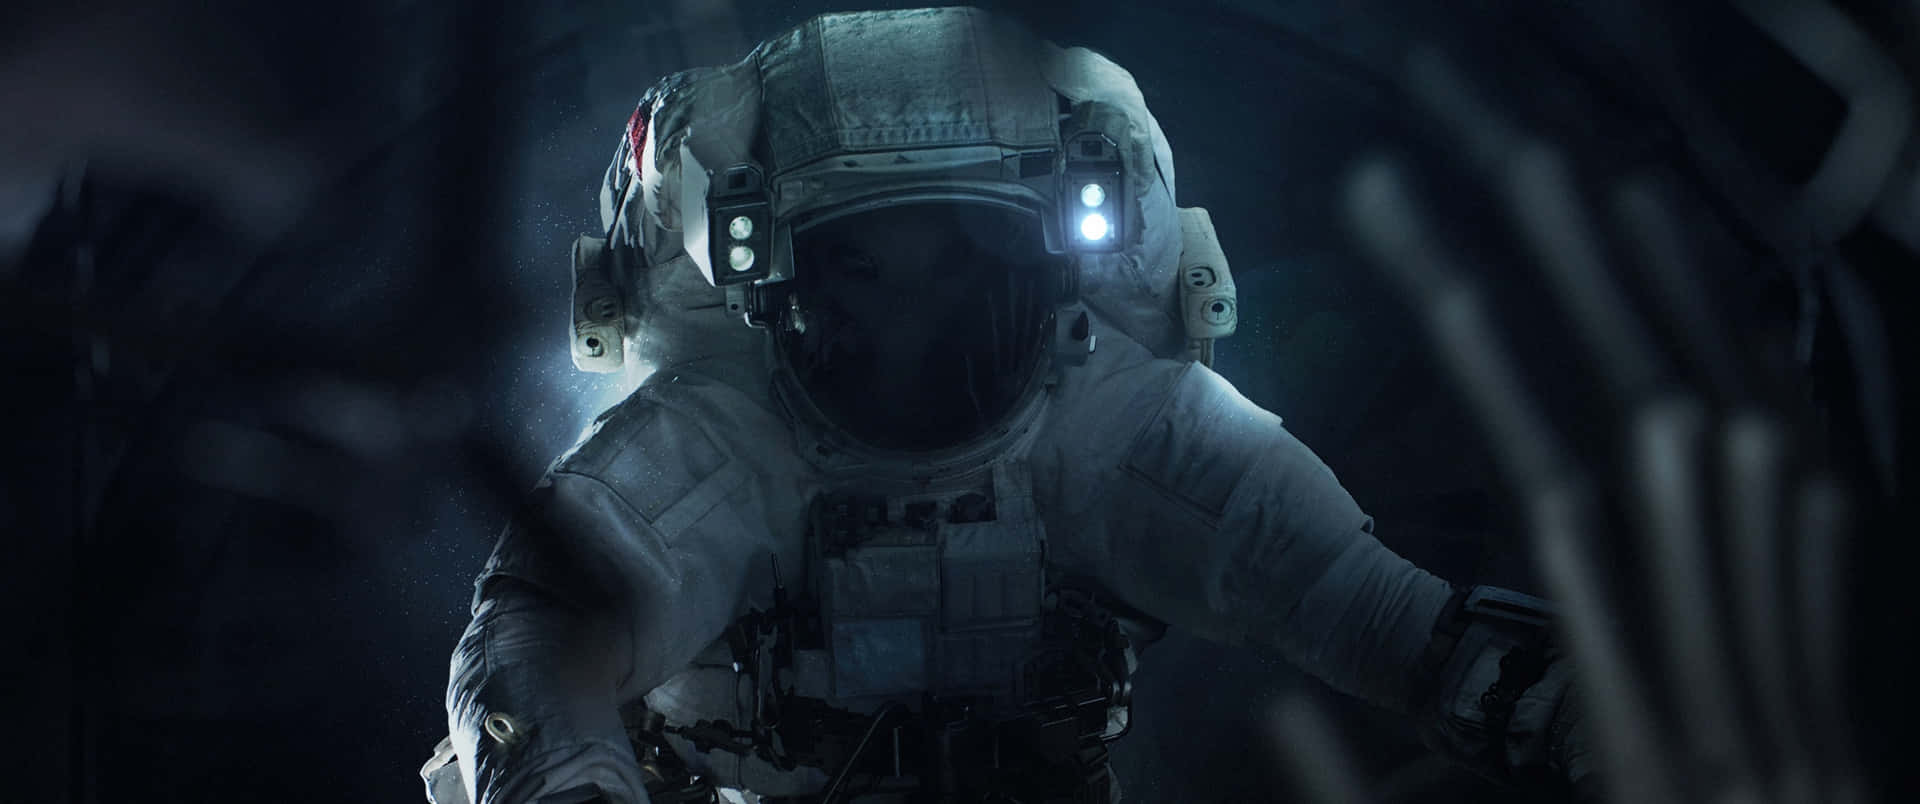 a man in spacesuit is walking through a dark tunnel